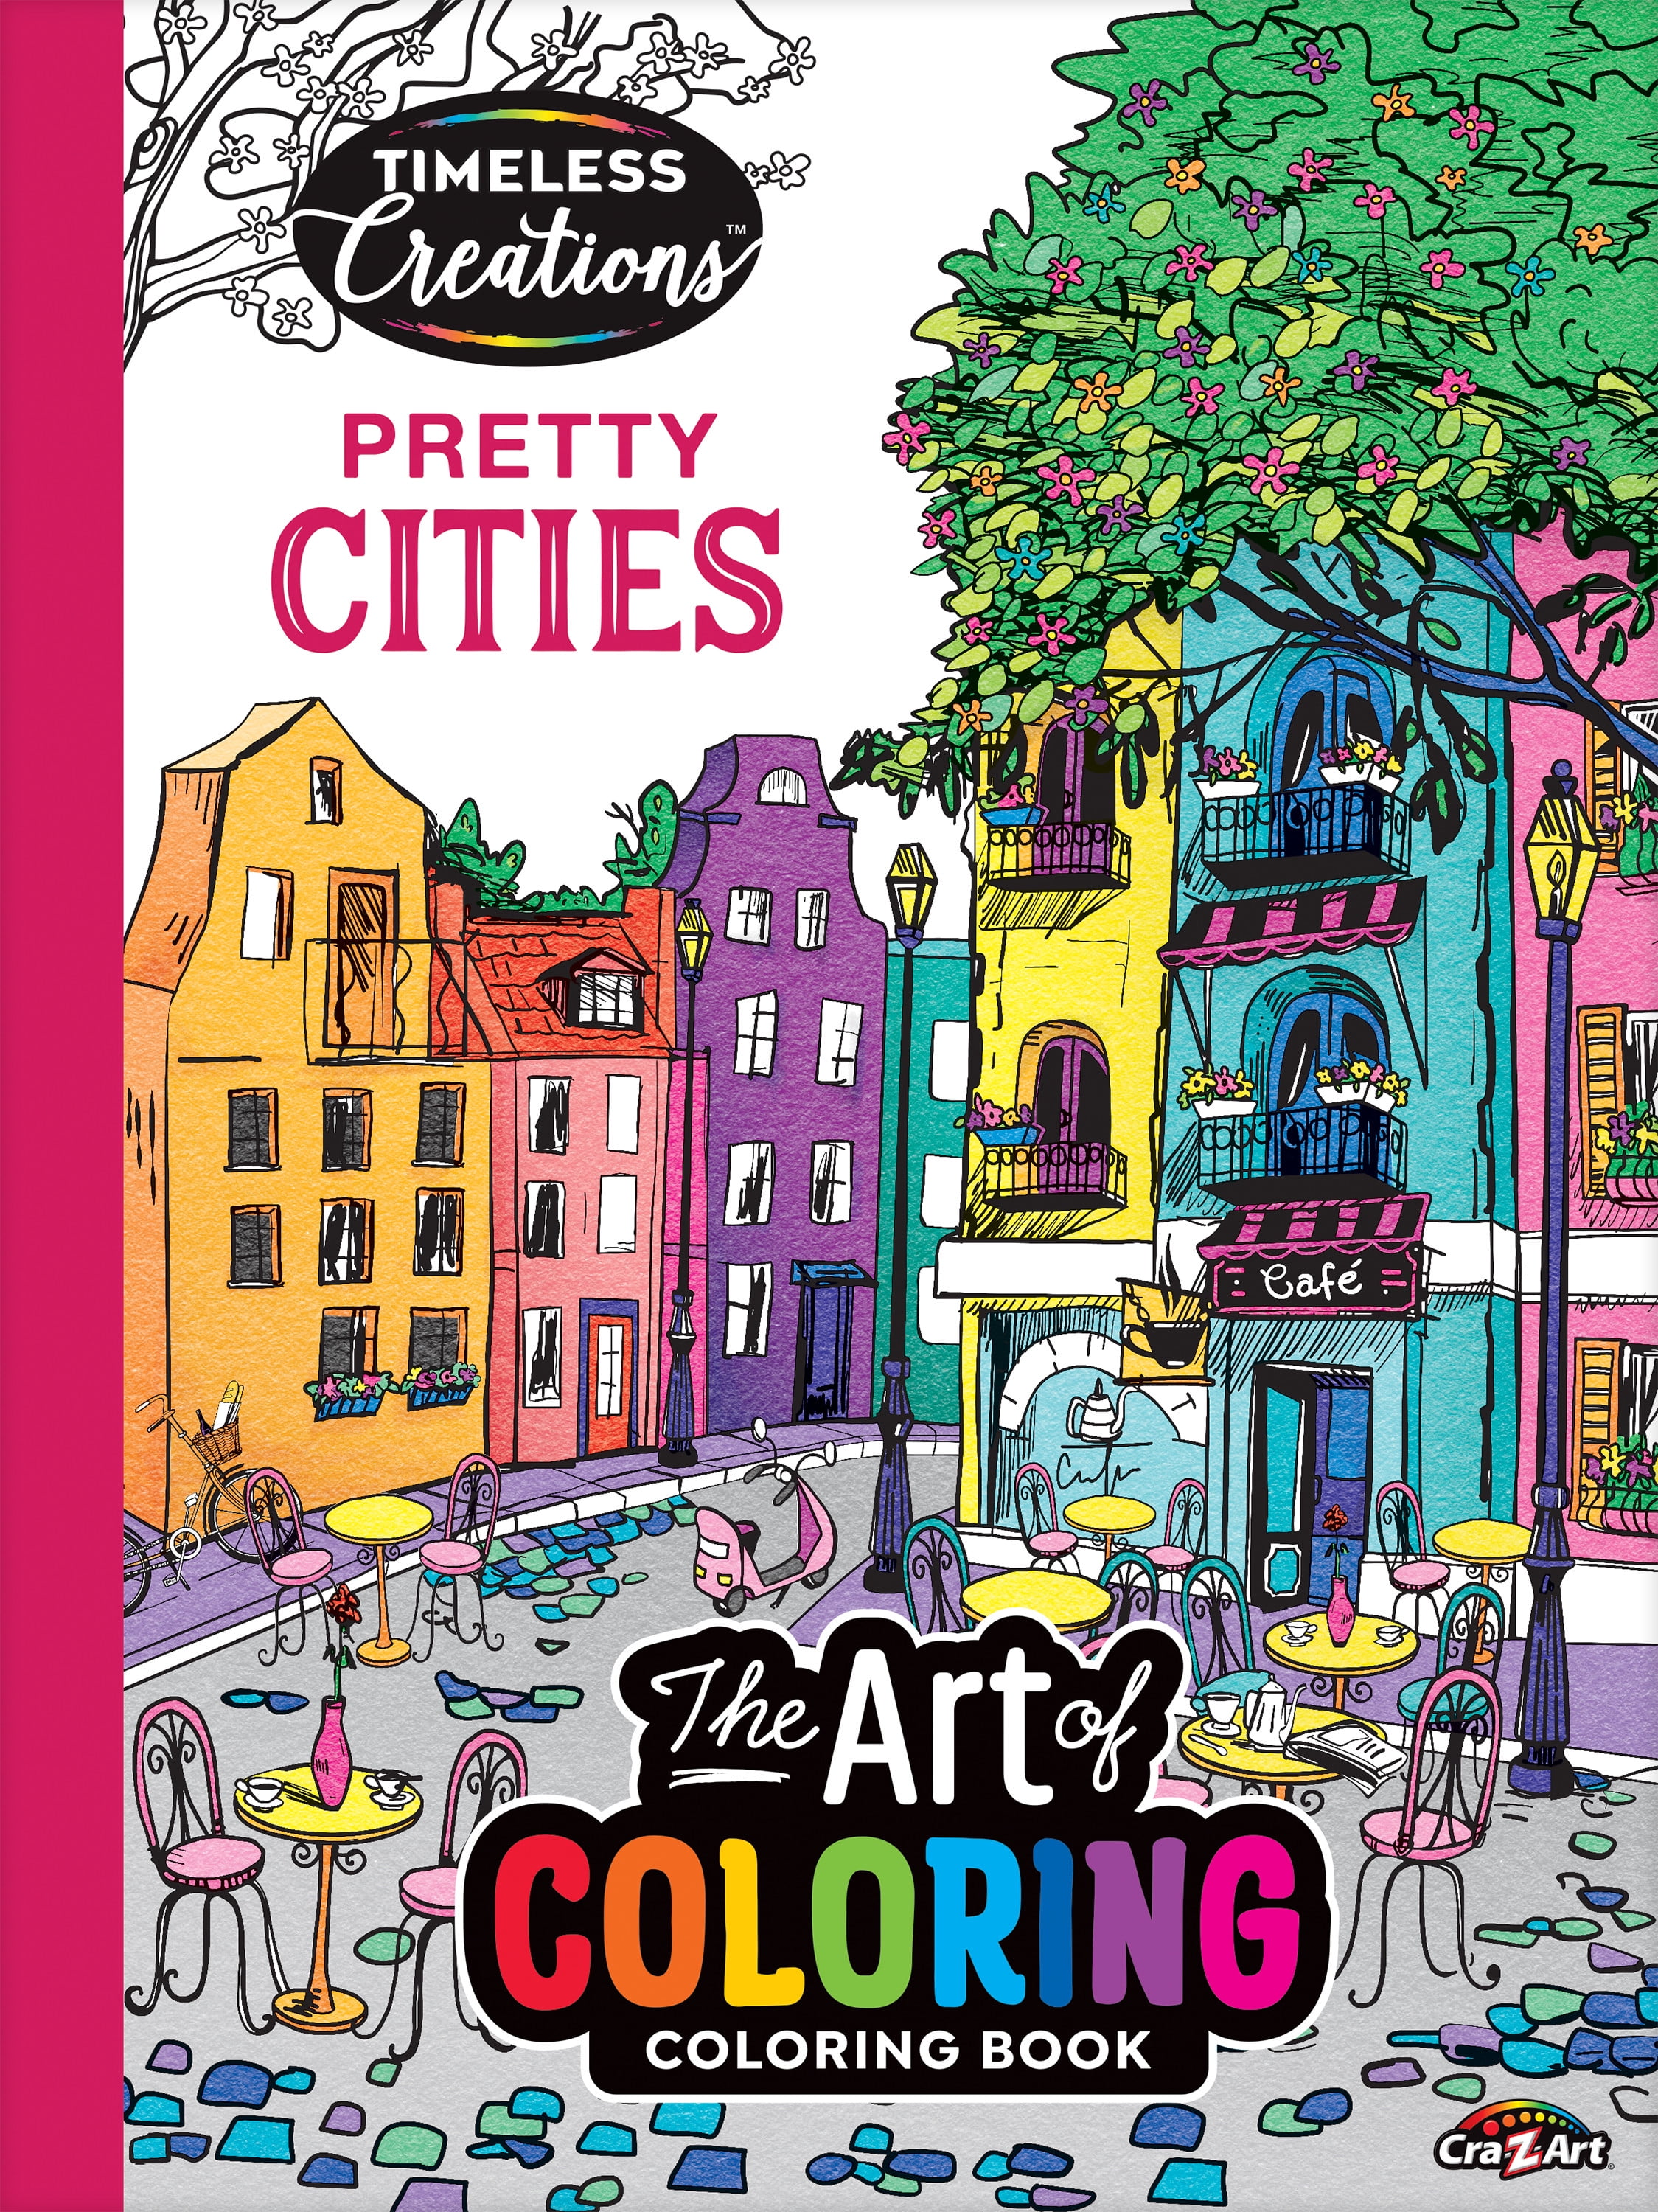 Cra-Z-Art: Timeless Creations, Pretty Cities New Adult Coloring Book, 64 Pages